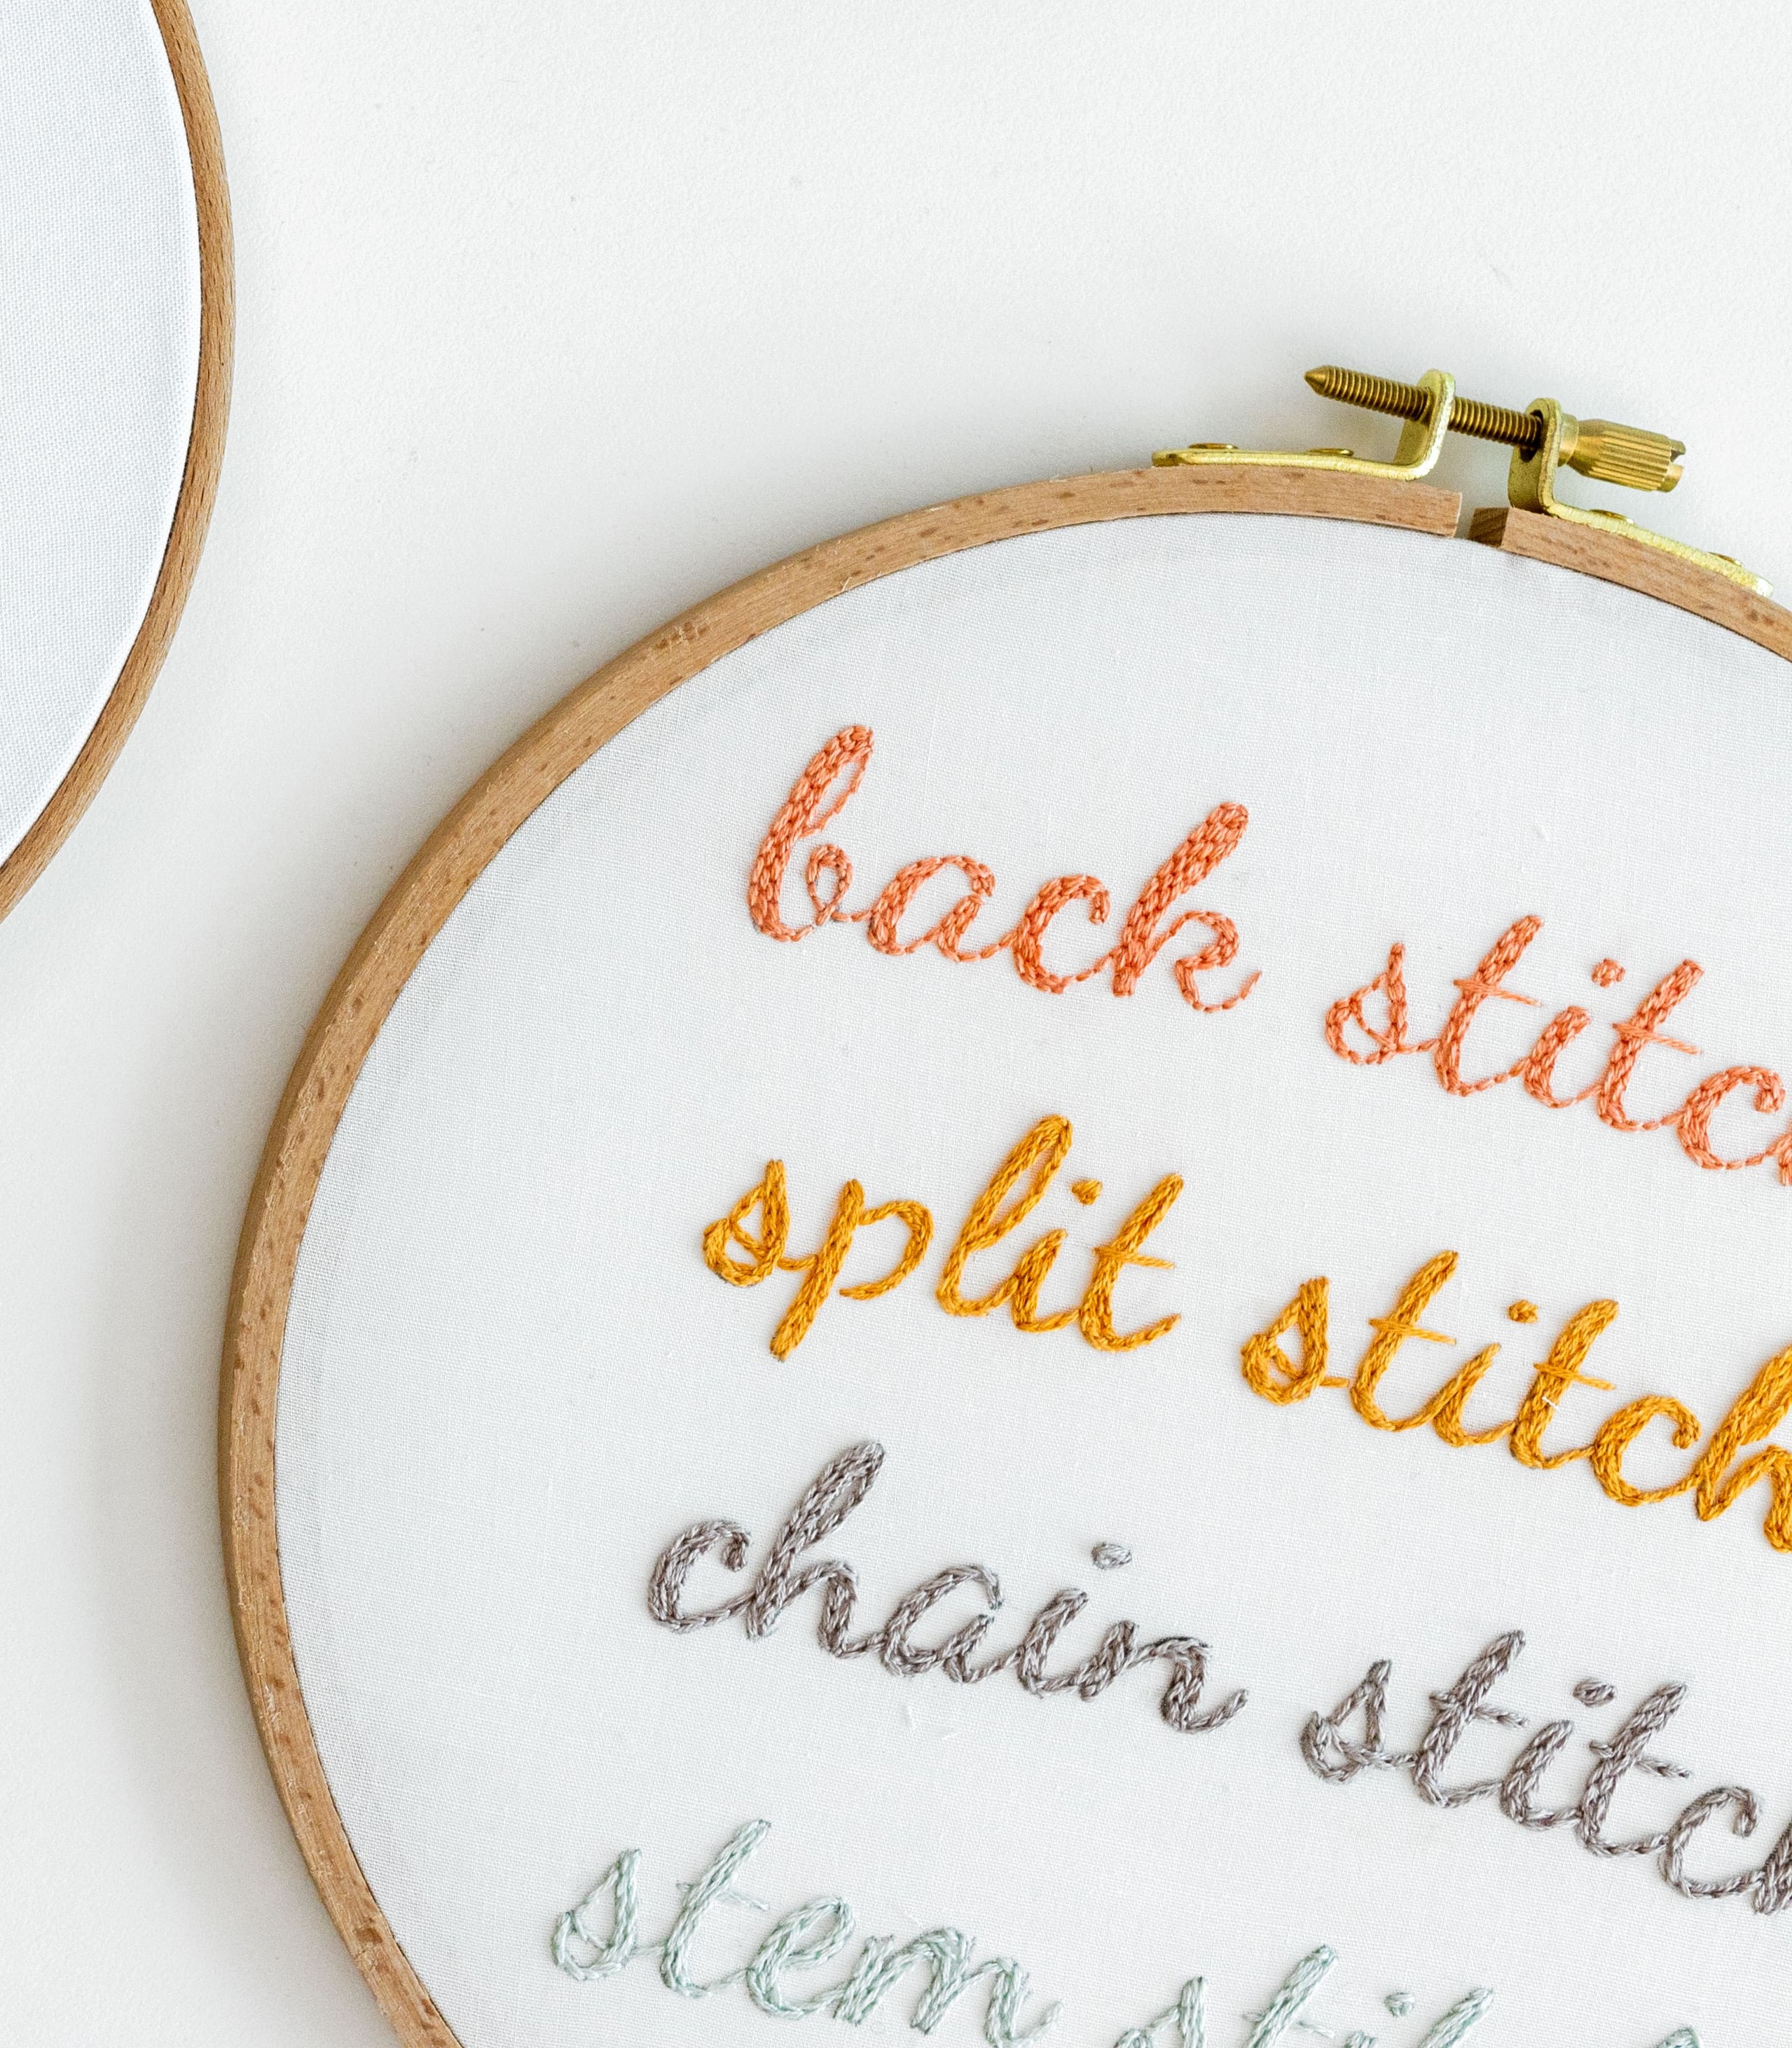 This is a image of cursive stitched fonts.